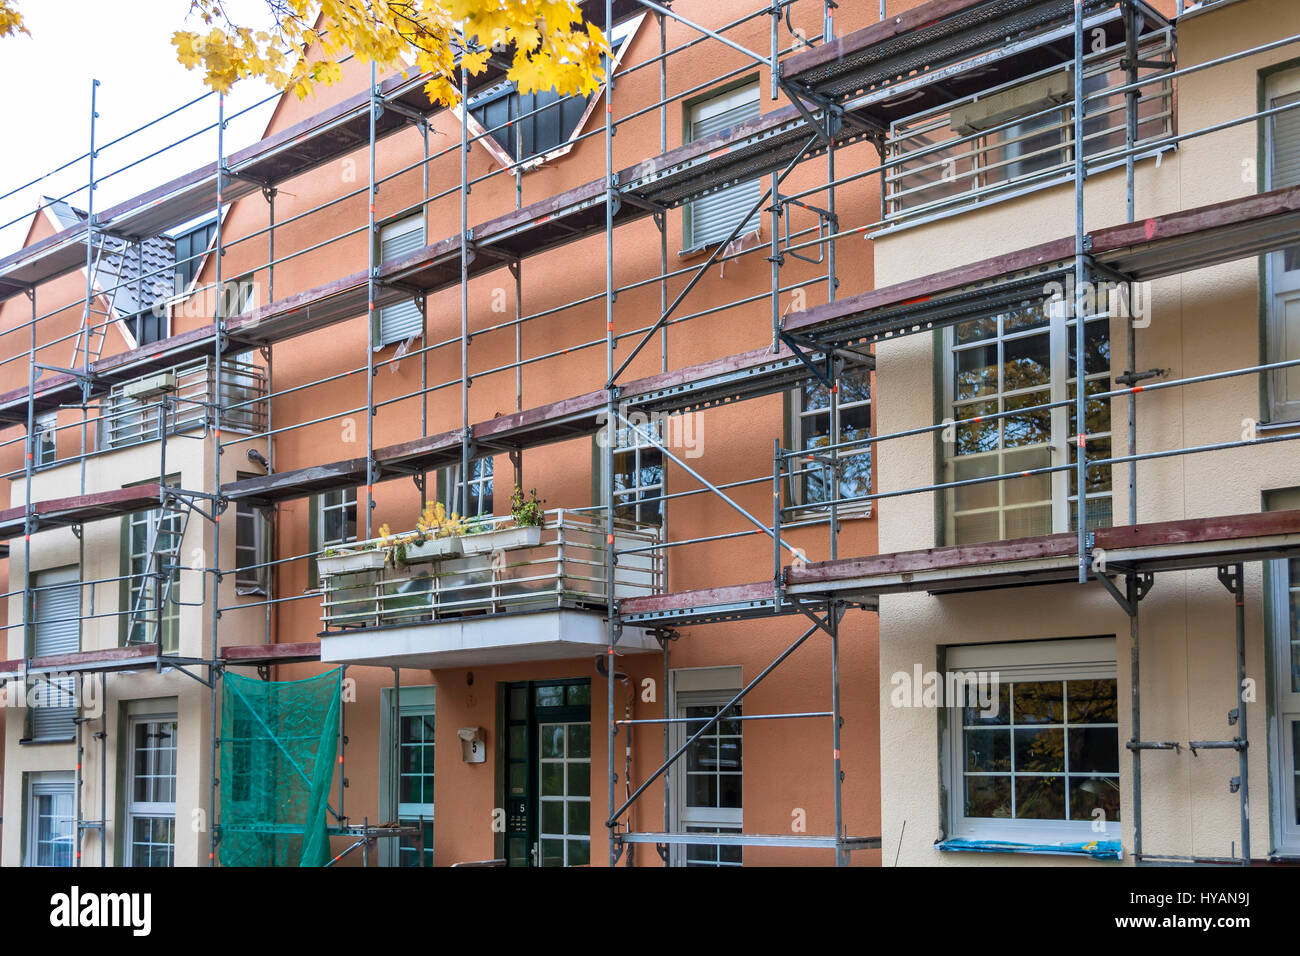 Europe, Germany, North Rhine-Westphalia, scaffold on a residential house in the city of Wetter on the river Ruhr. Stock Photo